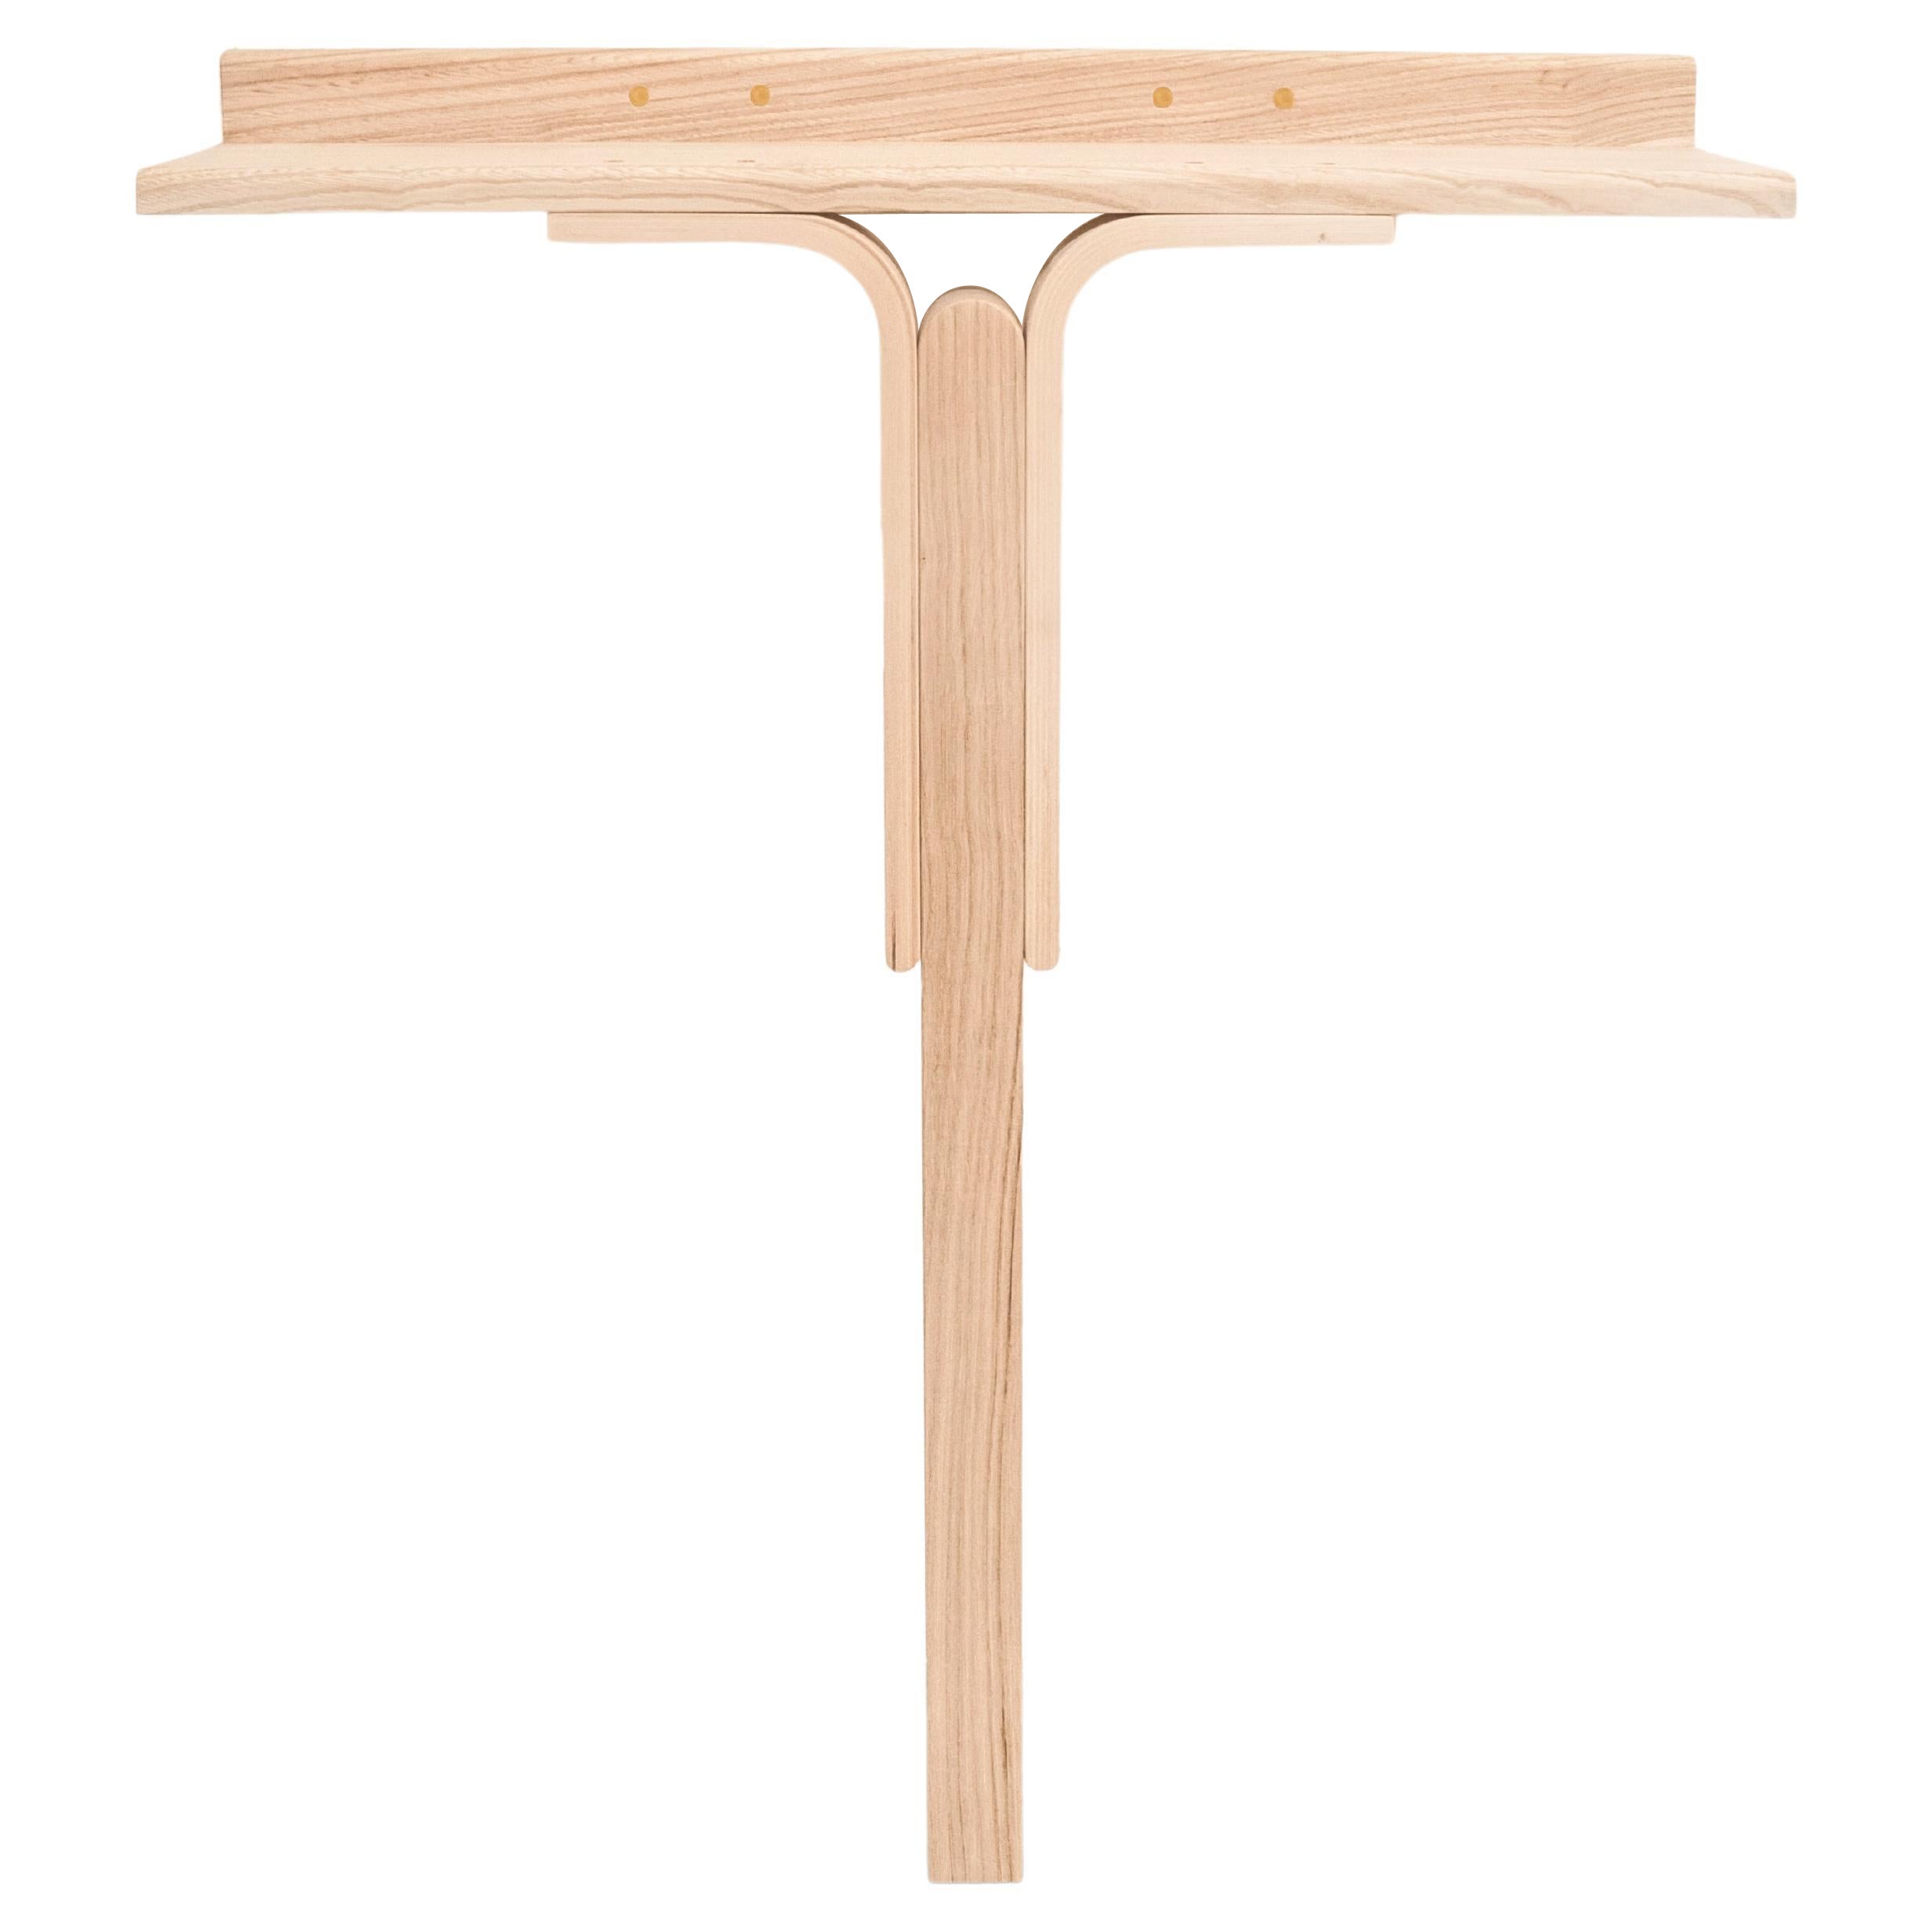 21st Century, Contemporary Wood Console Table Handmade in Italy by Ilabianchi For Sale